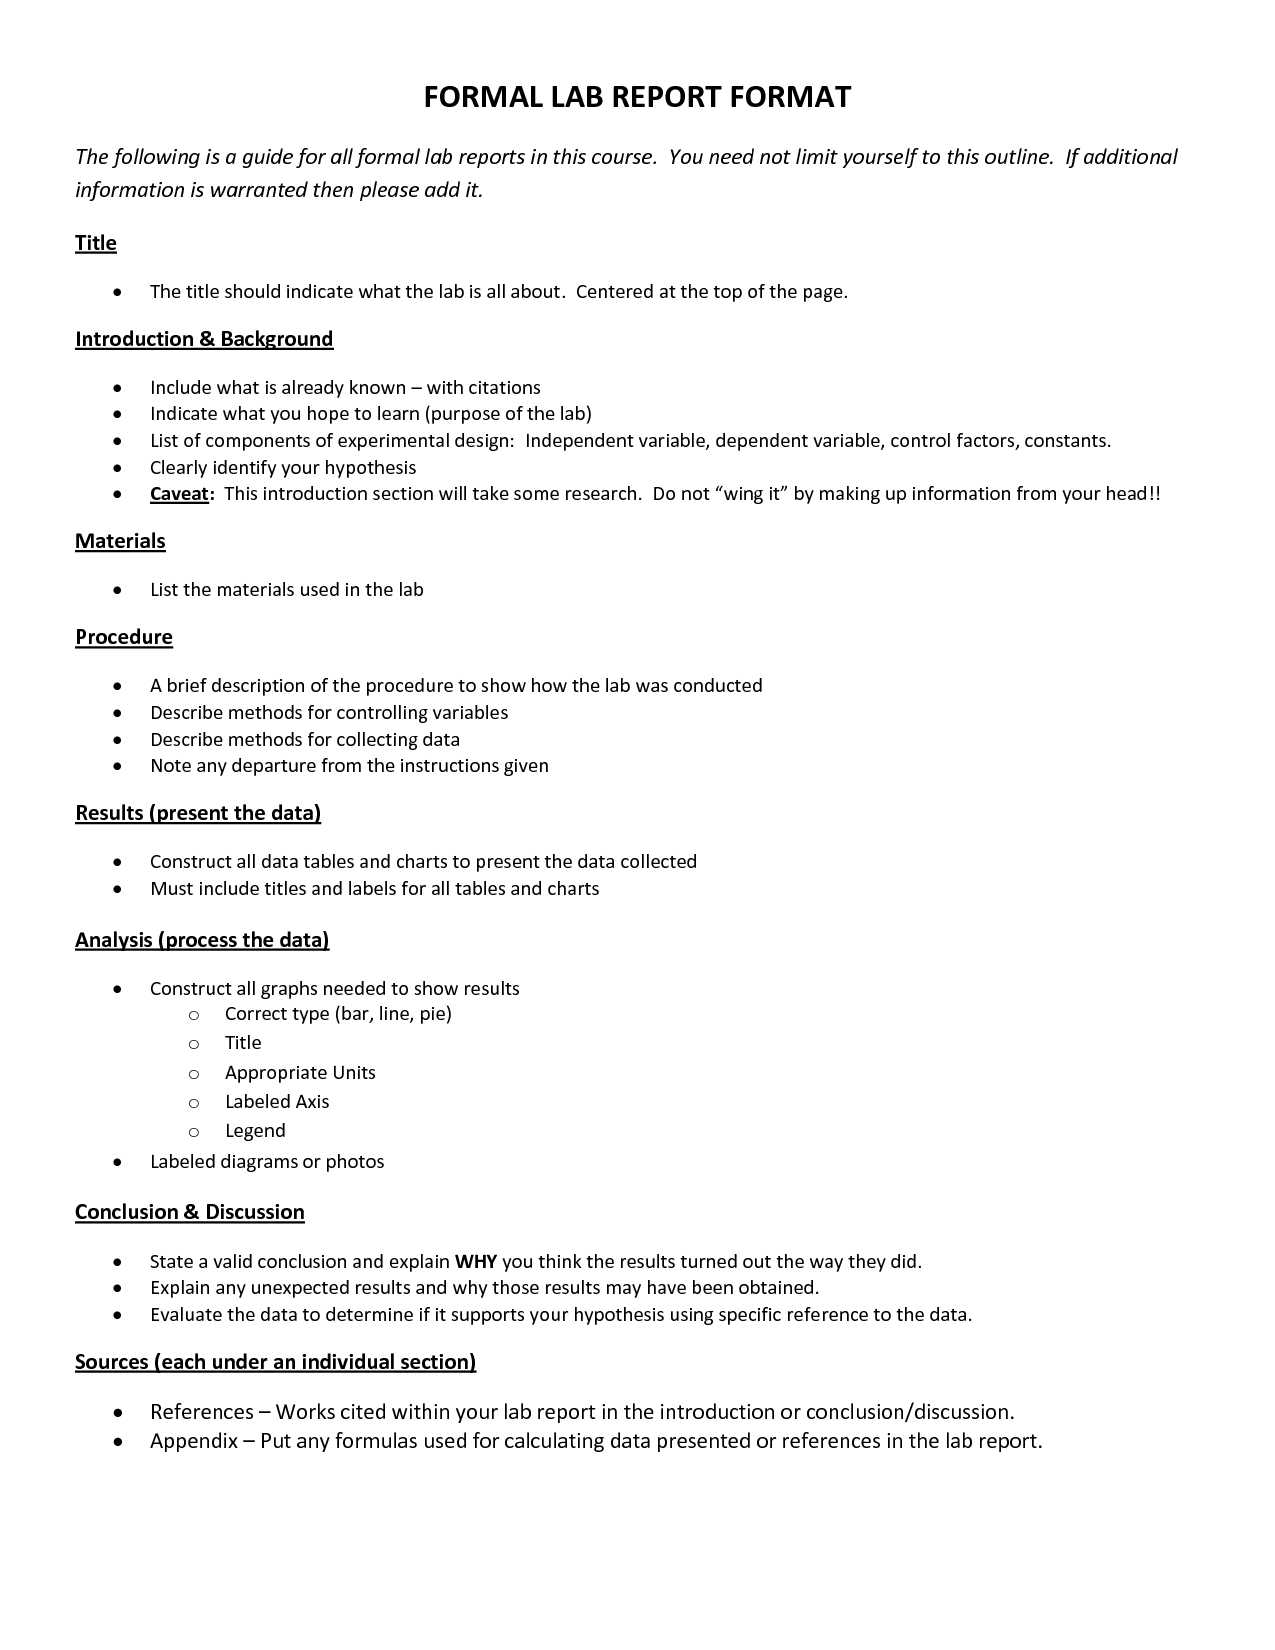 Formal Lab Report Format : Biological Science Picture For Formal Lab Report Template